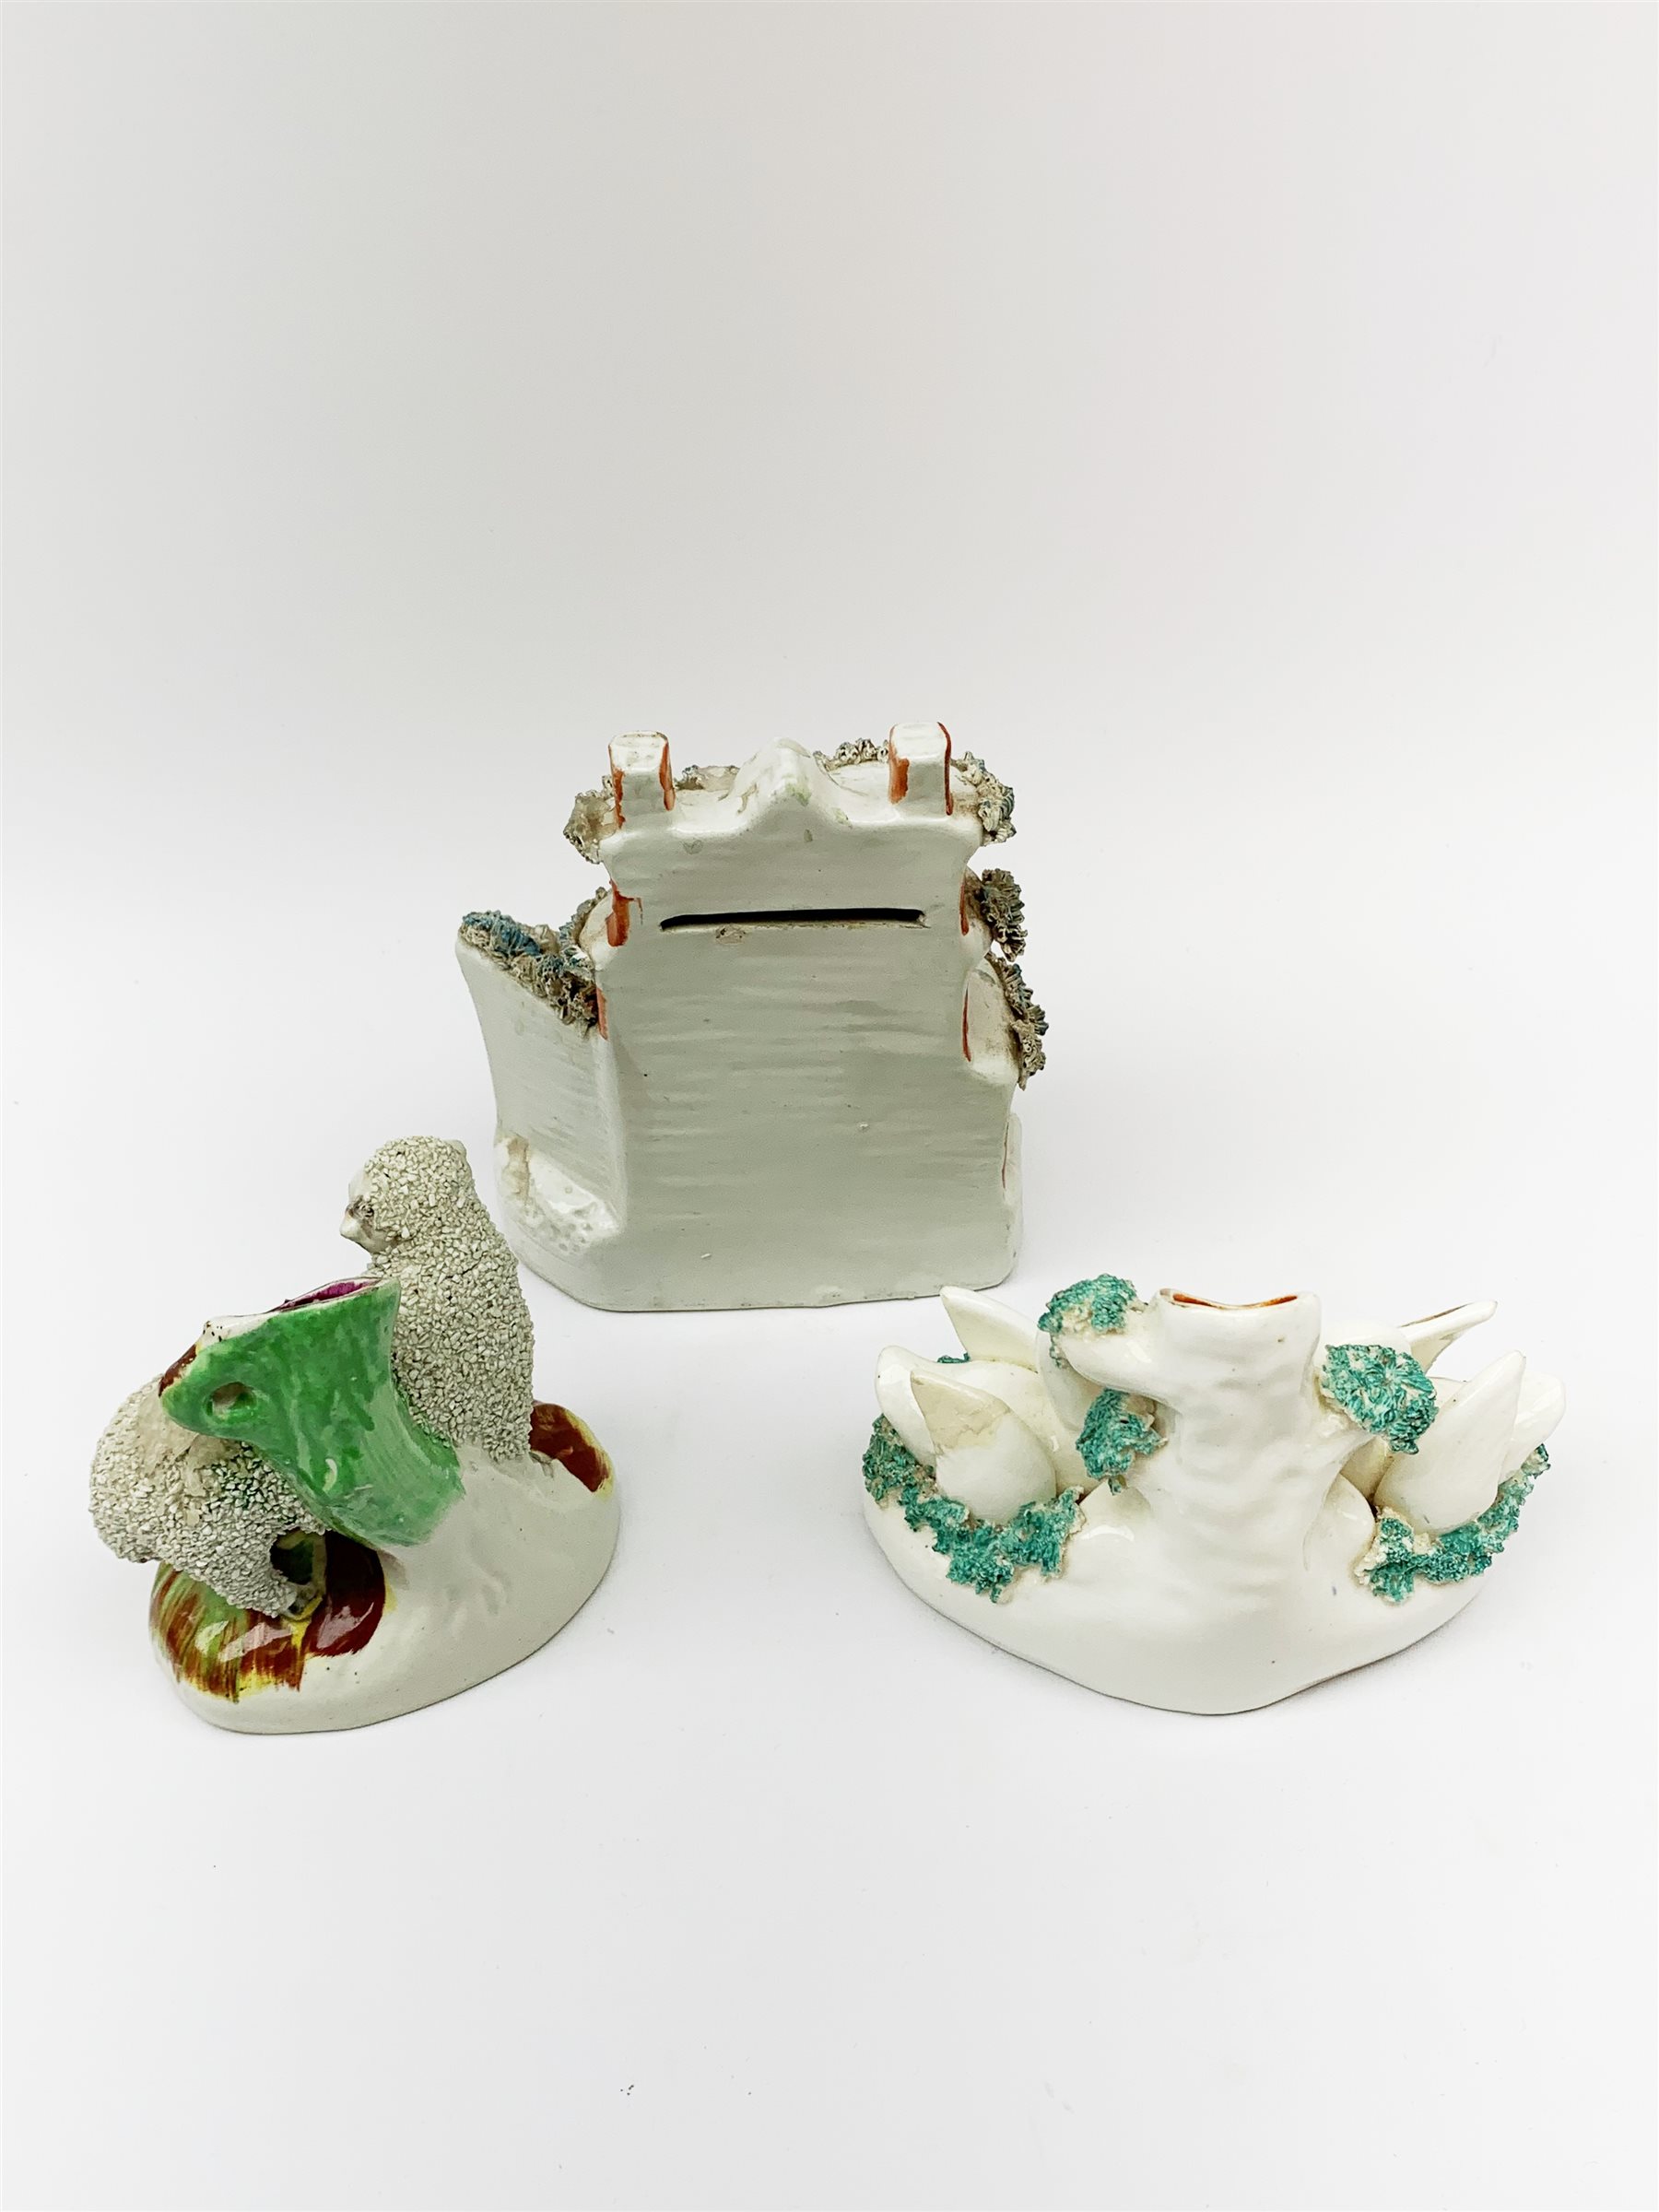 A 19th century Staffordshire money box in the form of a house - Image 5 of 27